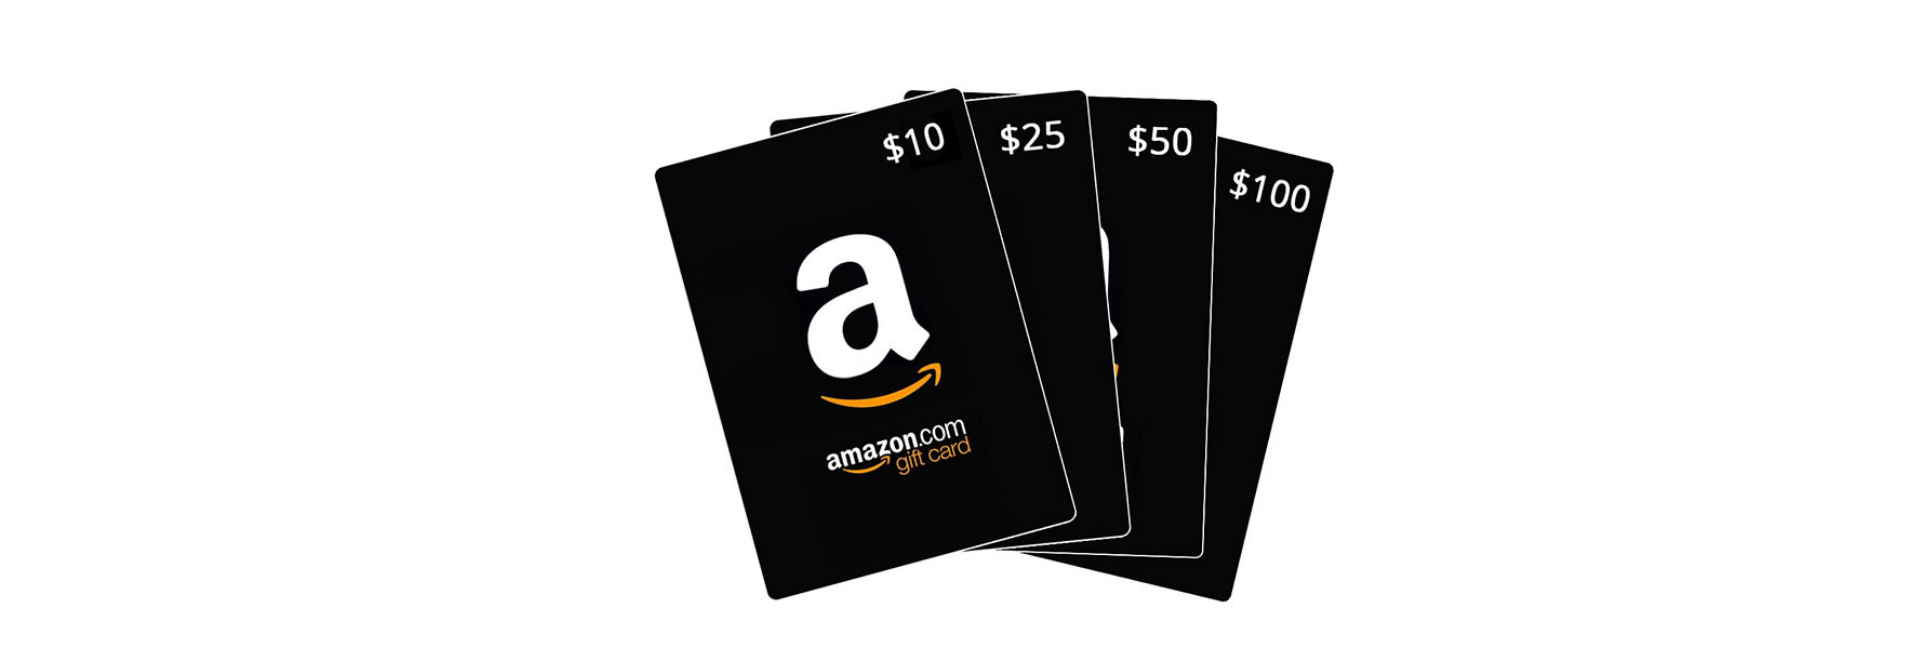 Amazon gift cards with white background